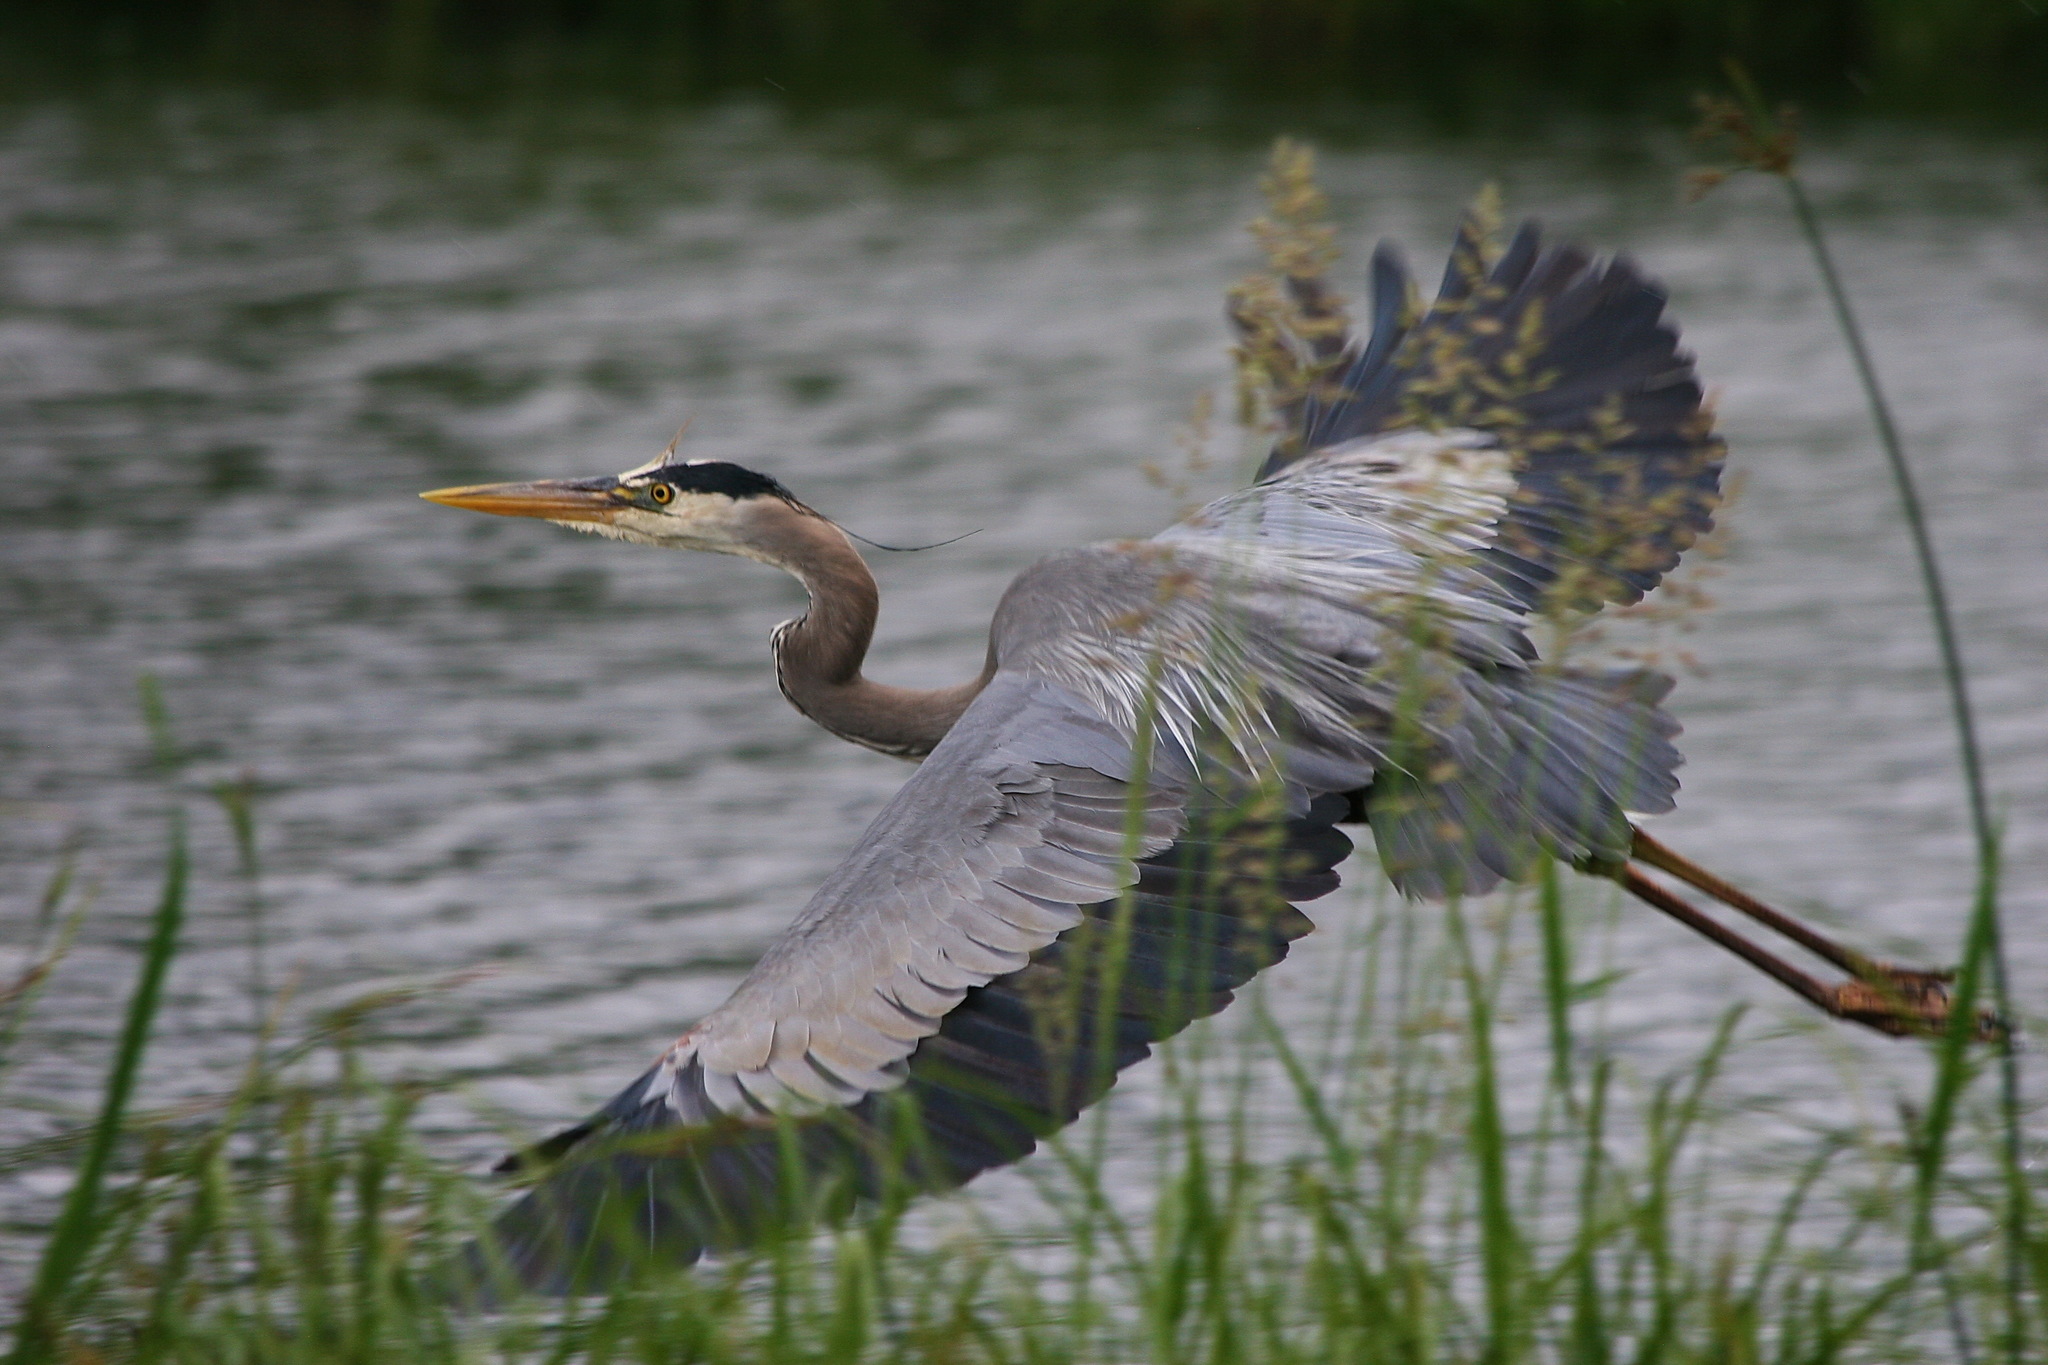 Great blue heron flying, with water in the background and green vegetation in the foreground